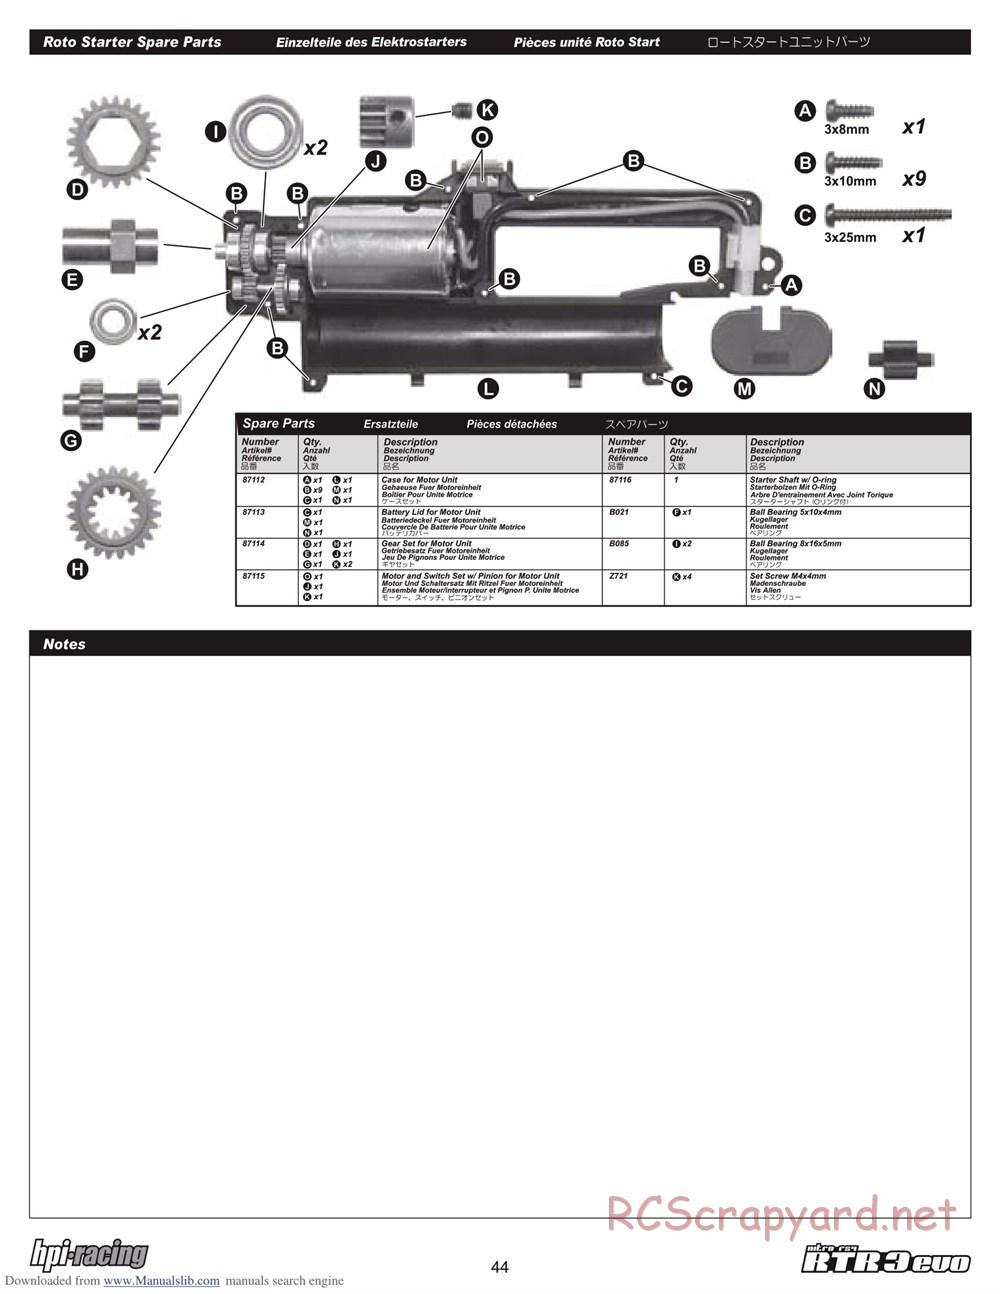 HPI - Nitro RS4 3 Evo - Exploded View - Page 44